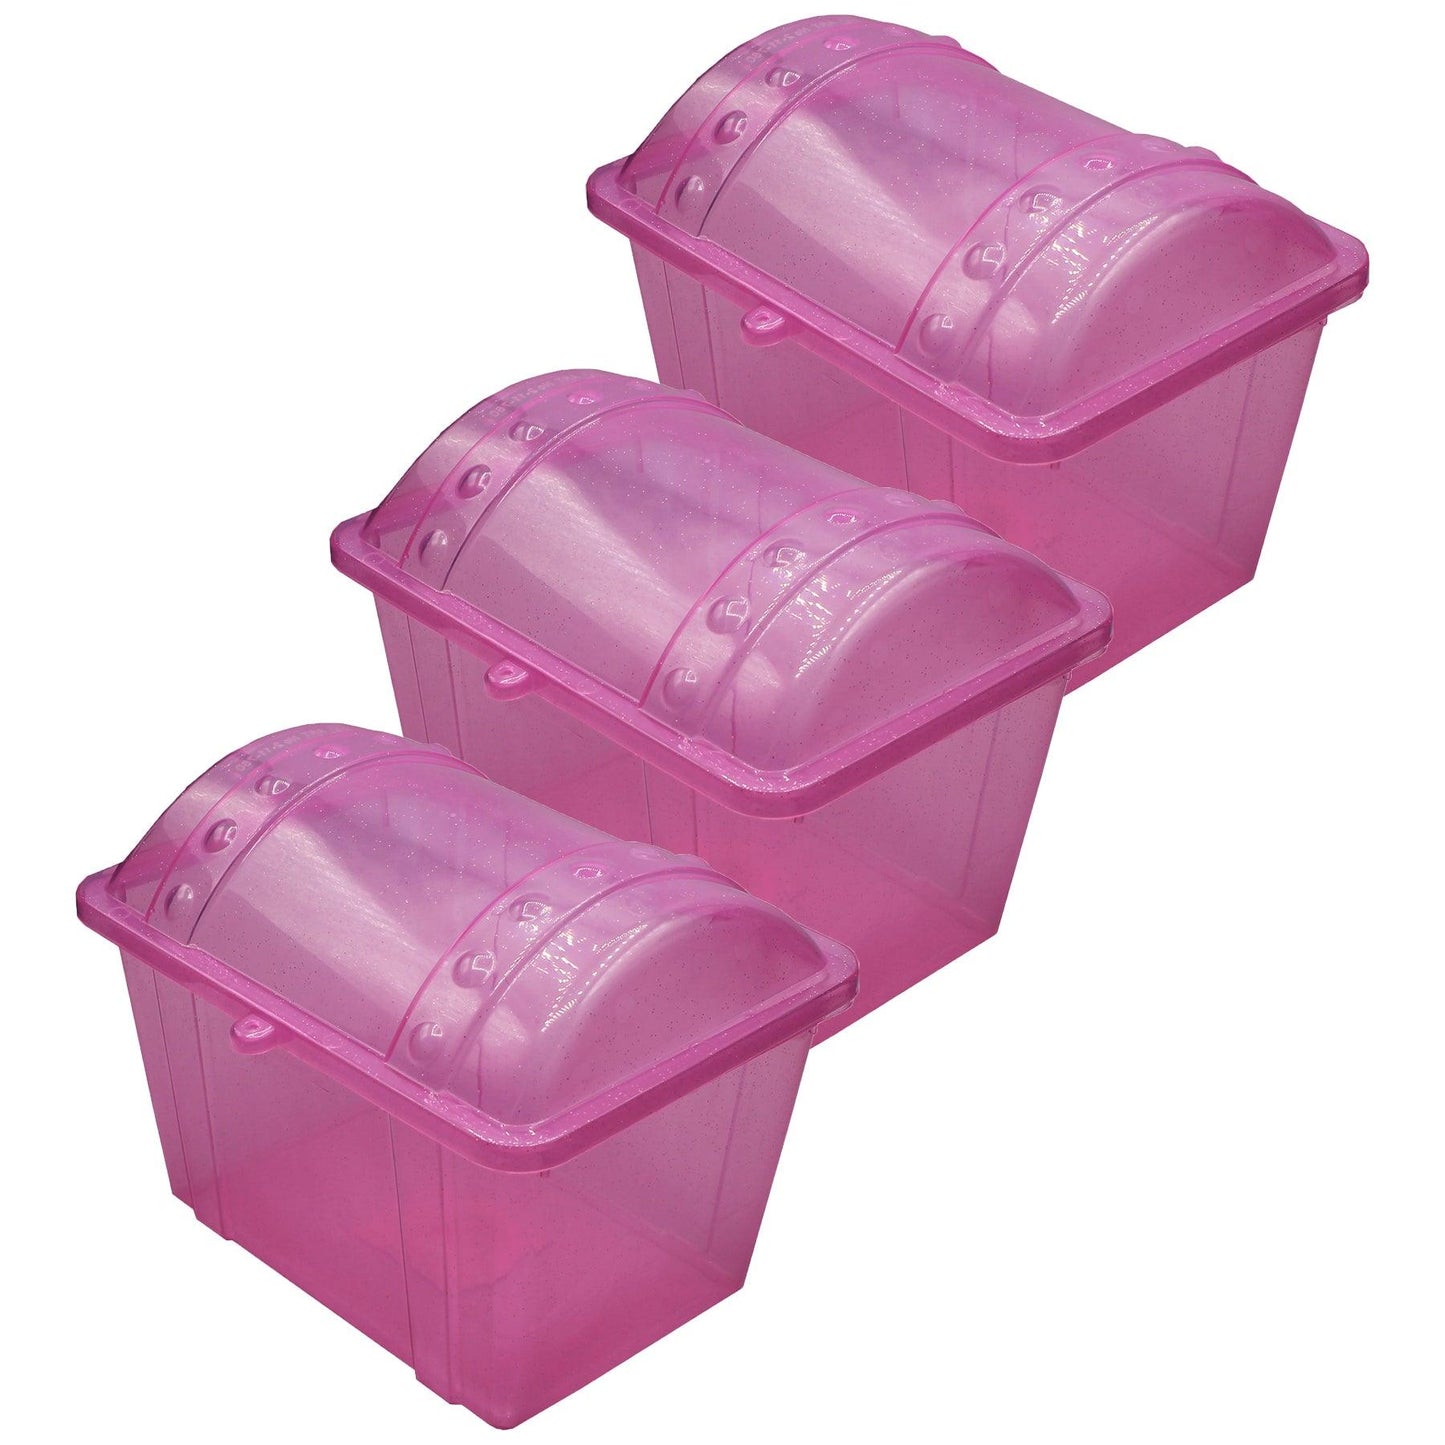 Jr. Treasure Chest, Pink Sparkle, Pack of 3 - Loomini